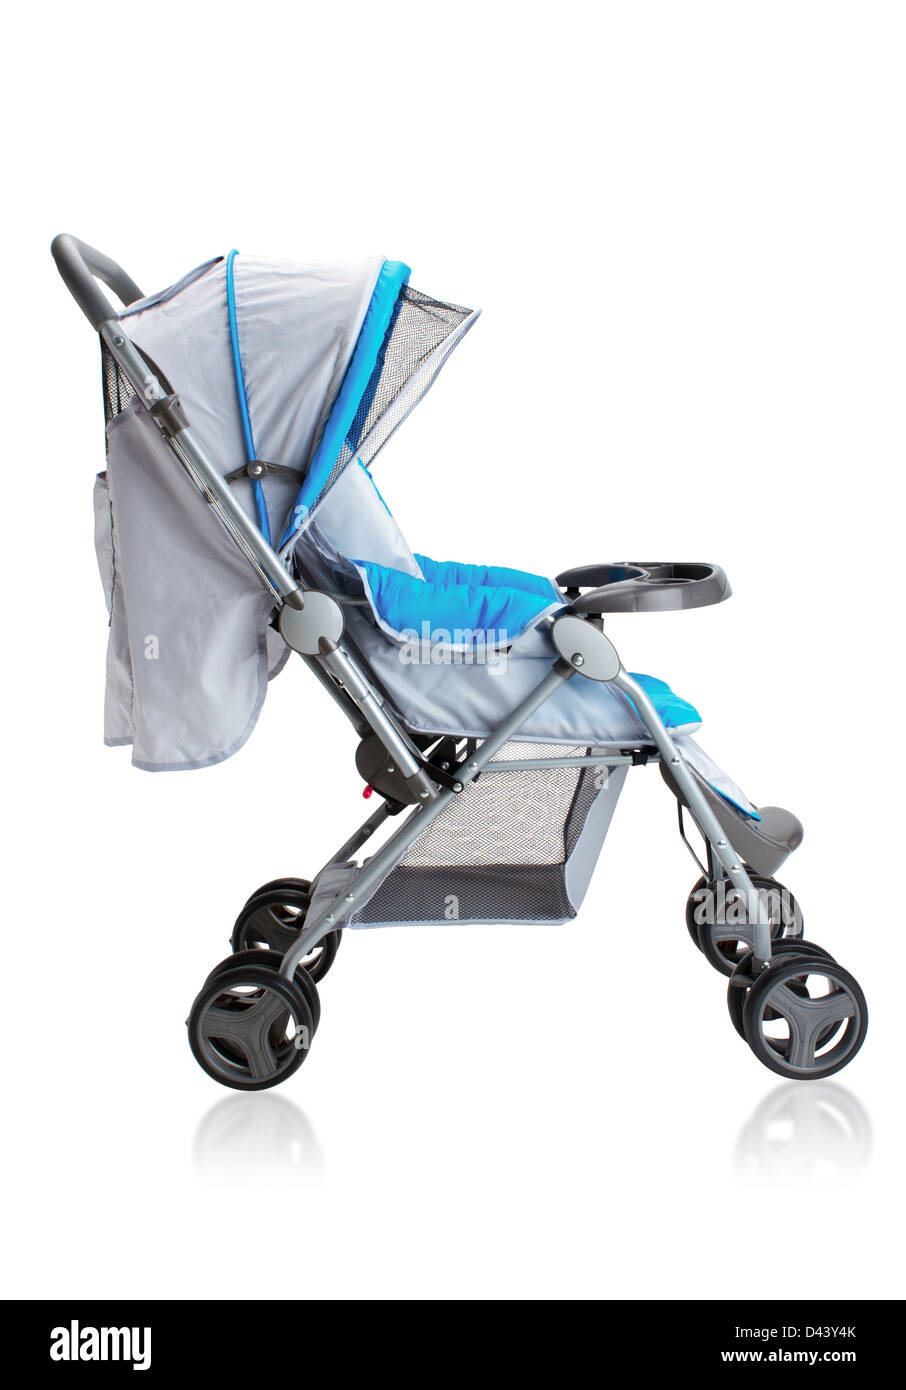 Smooth pram stroller carriage for new baby Stock Photo